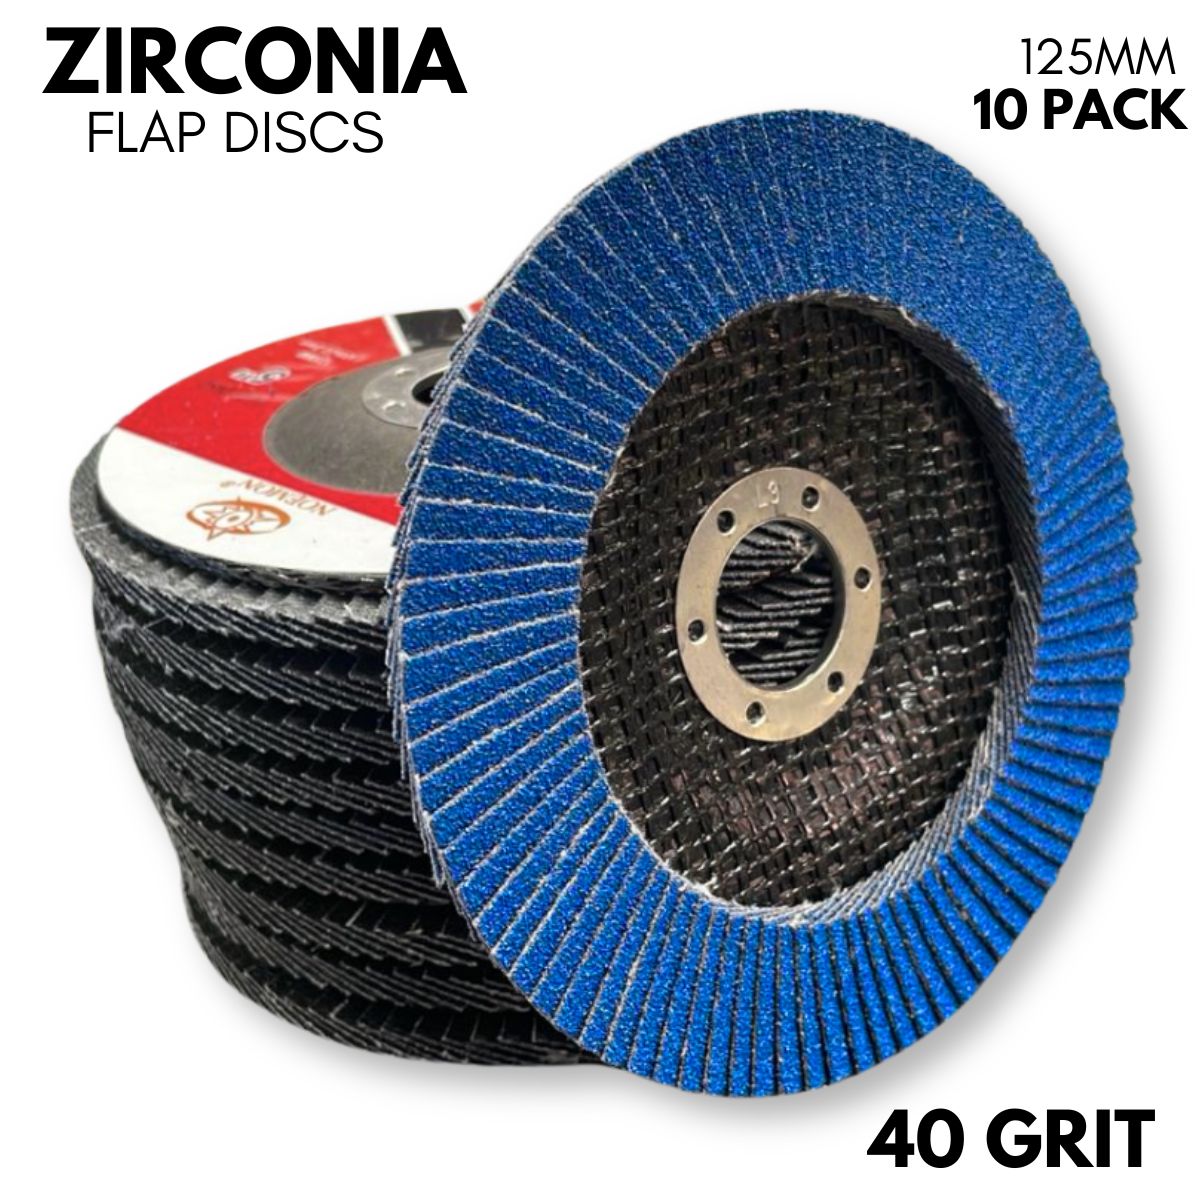 10 Pack | 125mm (5”) Flap Discs | 40 GRIT Zirconia - South East Clearance Centre